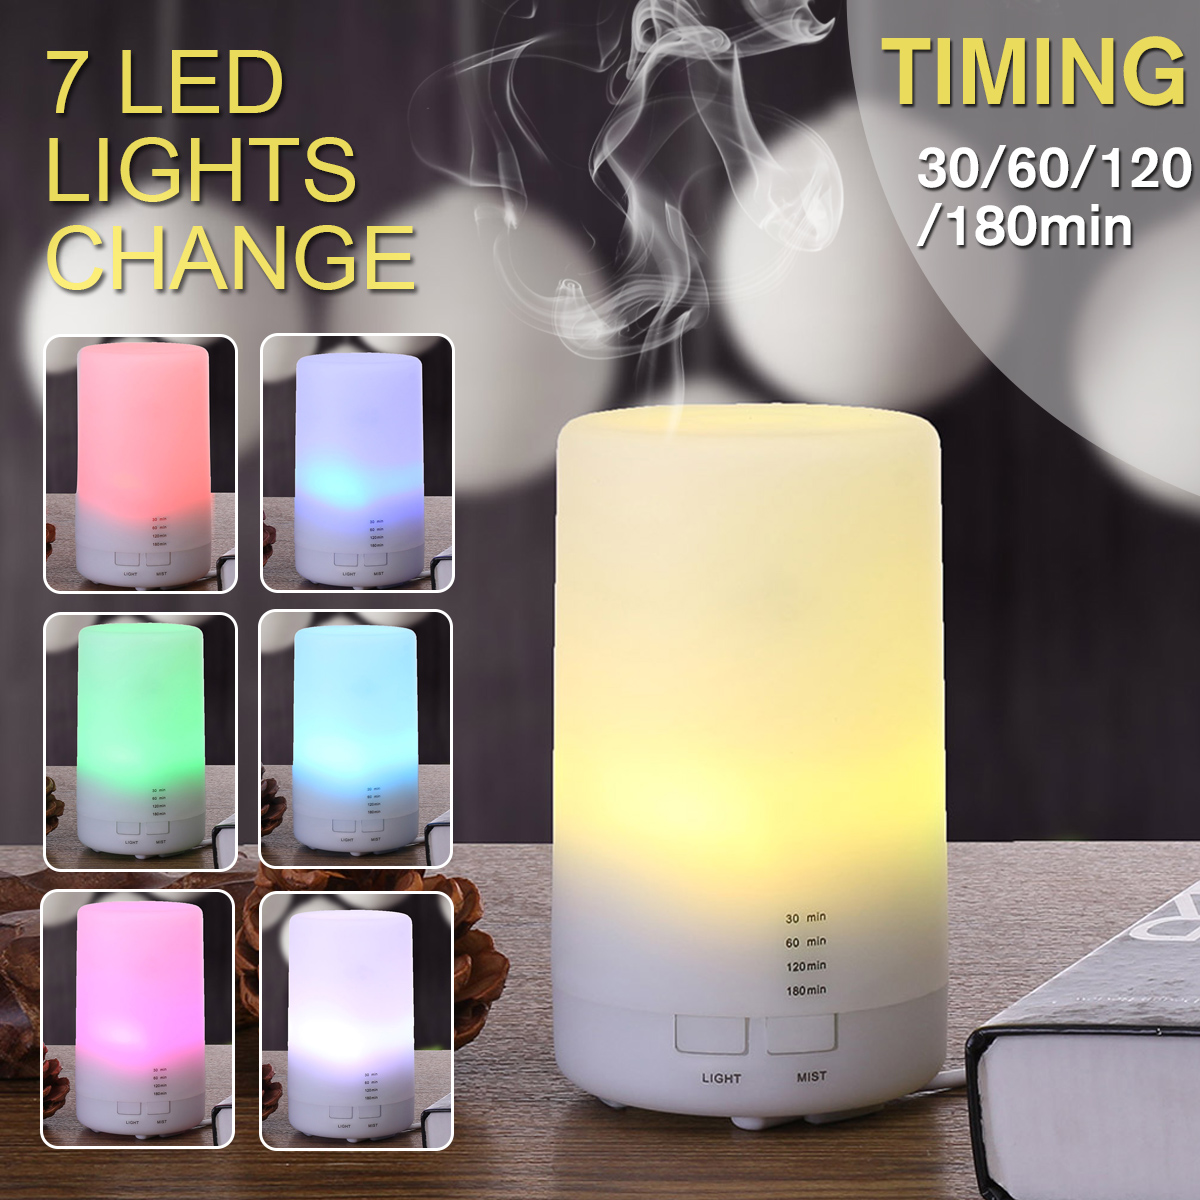 7-LED-Ultrasonic-Aroma-Essential-Diffuser-Air-Humidifier-Purifier-Aromatherapy-Timing-Function-1605103-2